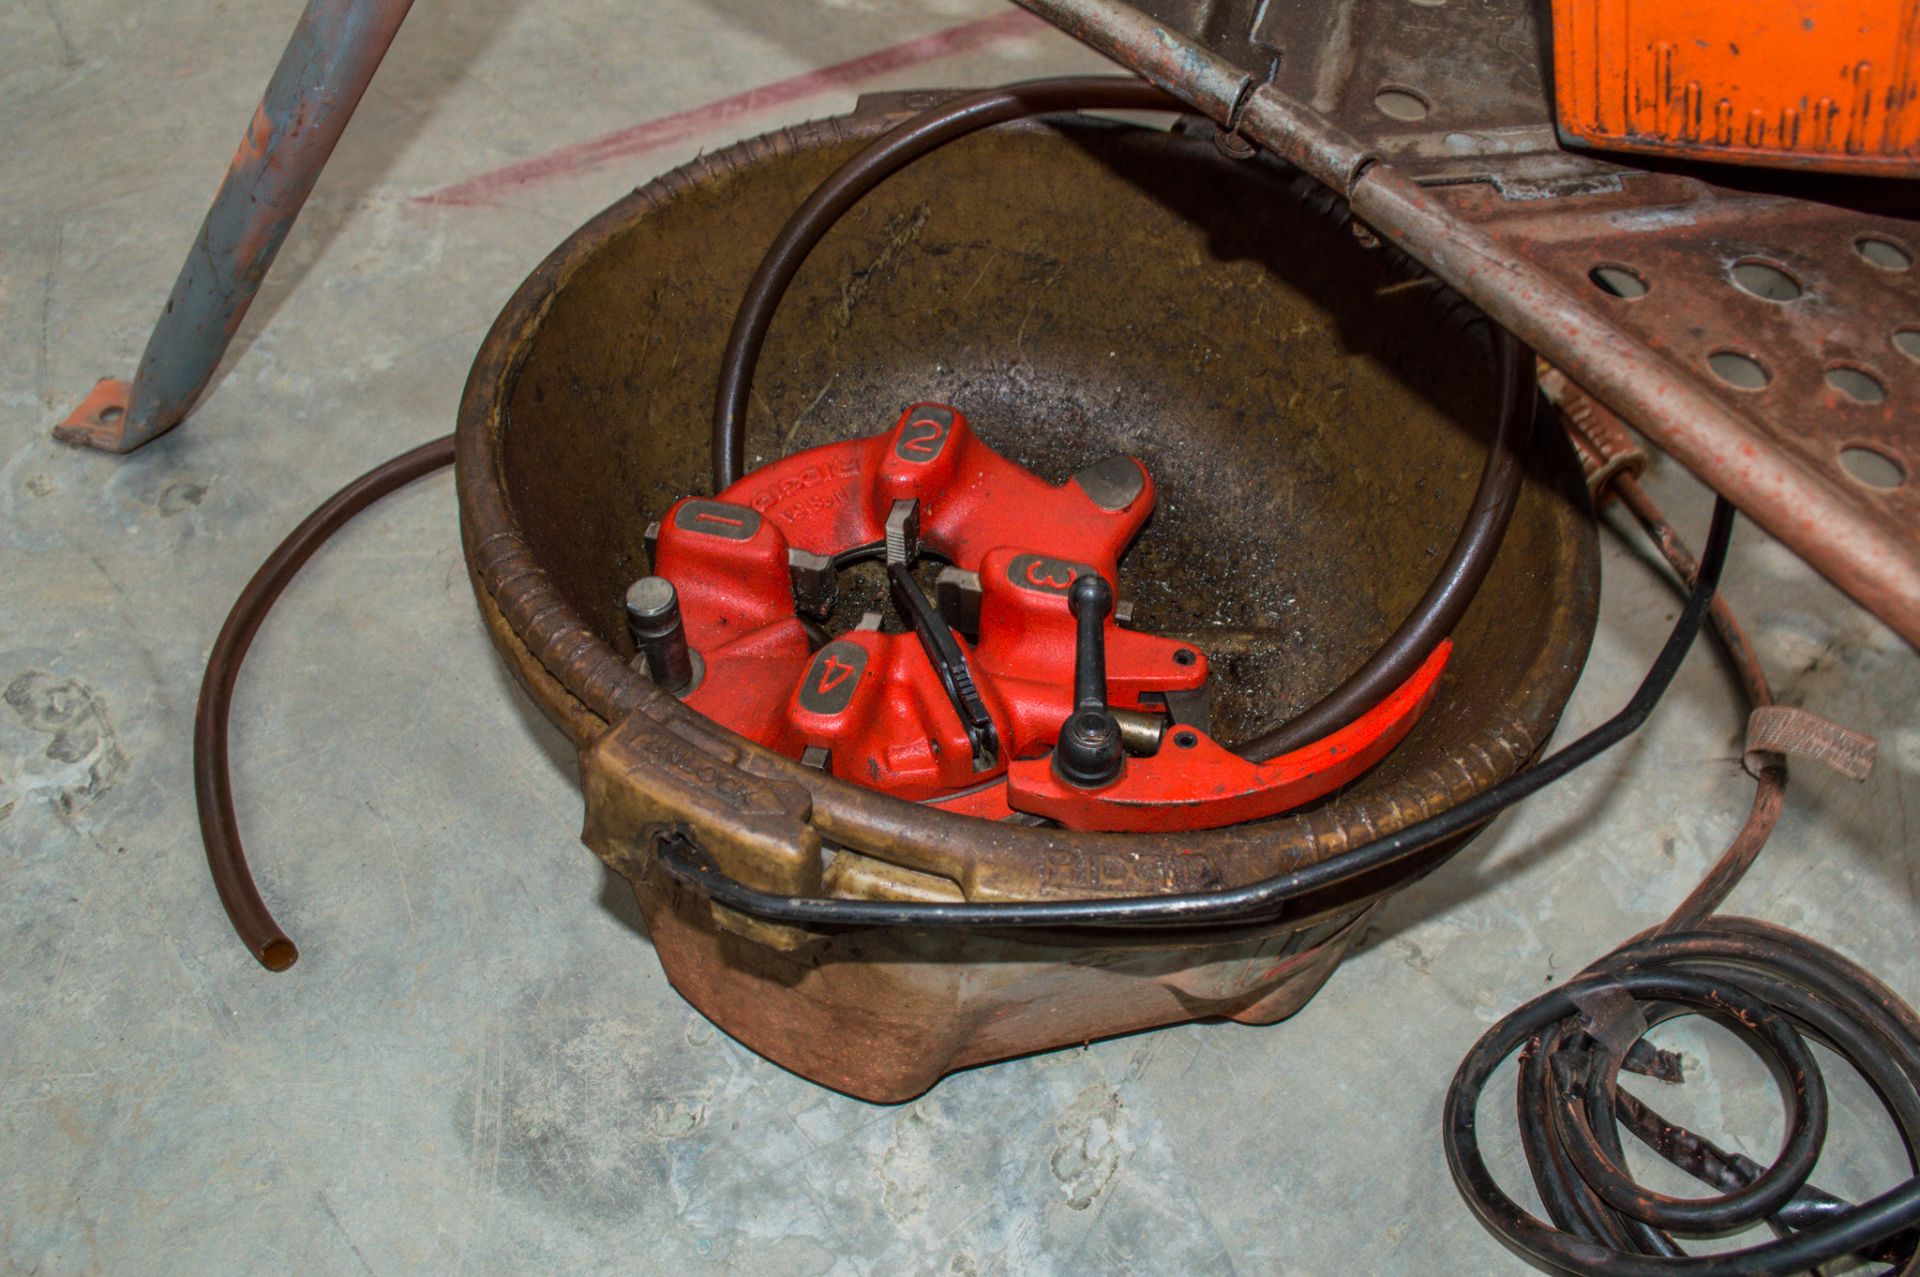 Ridgid 300 110 volt pipe threading machine c/w stand, oil bucket, threading head and foot pedal - Image 3 of 3